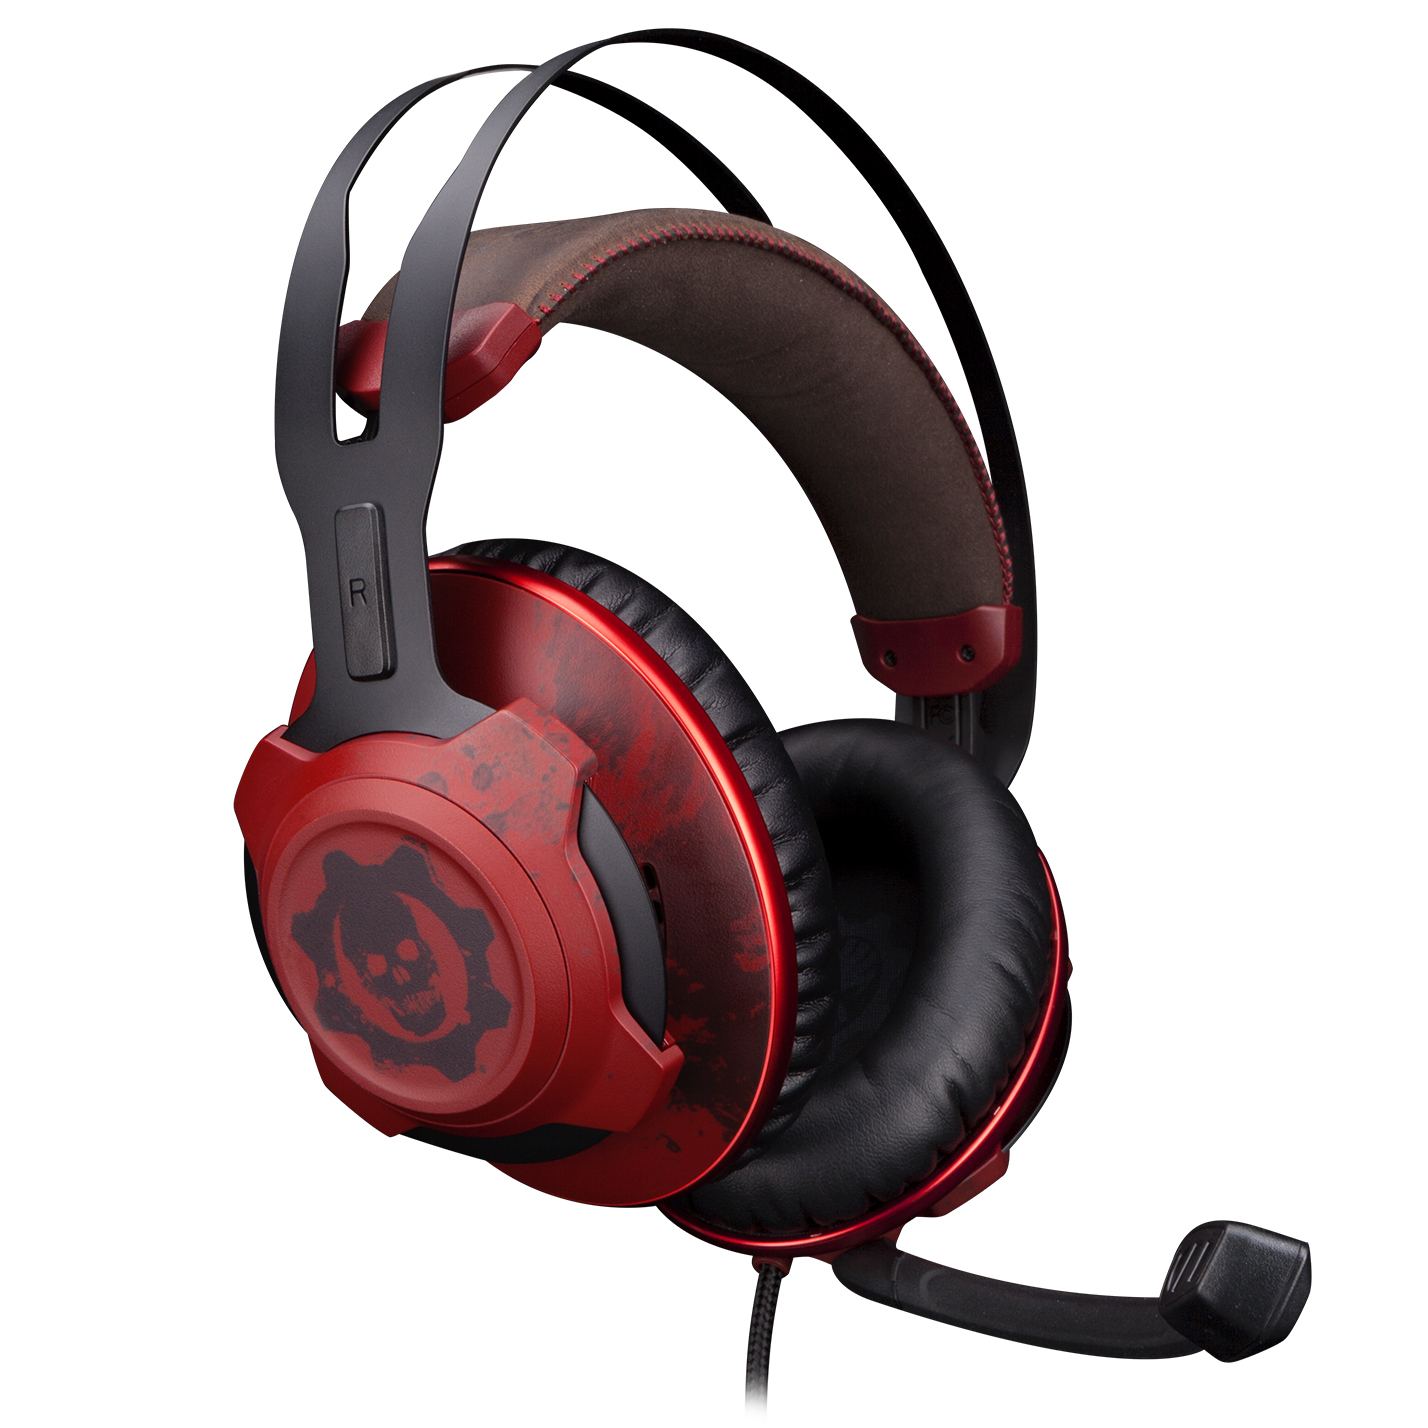 HyperX CloudX Headphones, a value-priced must-have